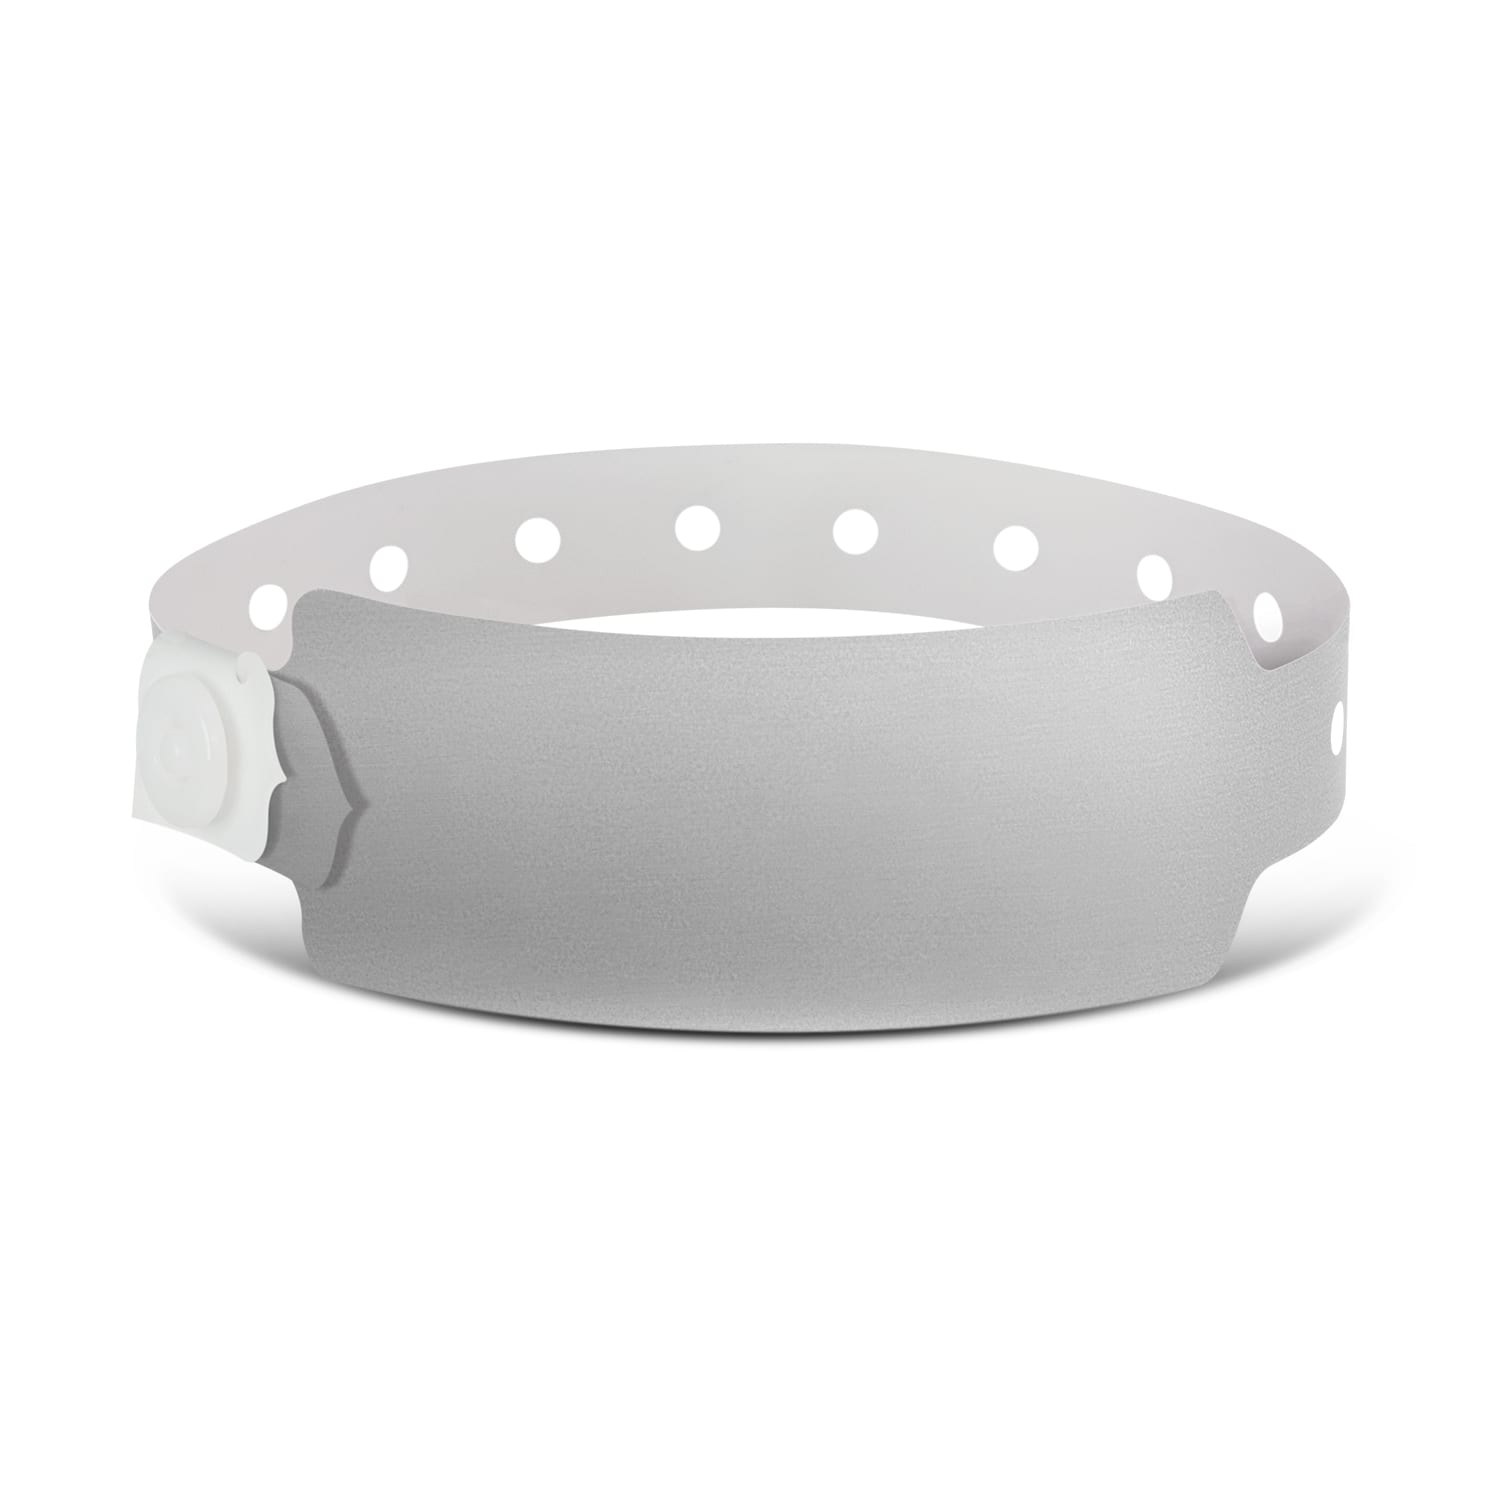 Trends Plastic Event Wrist Band band